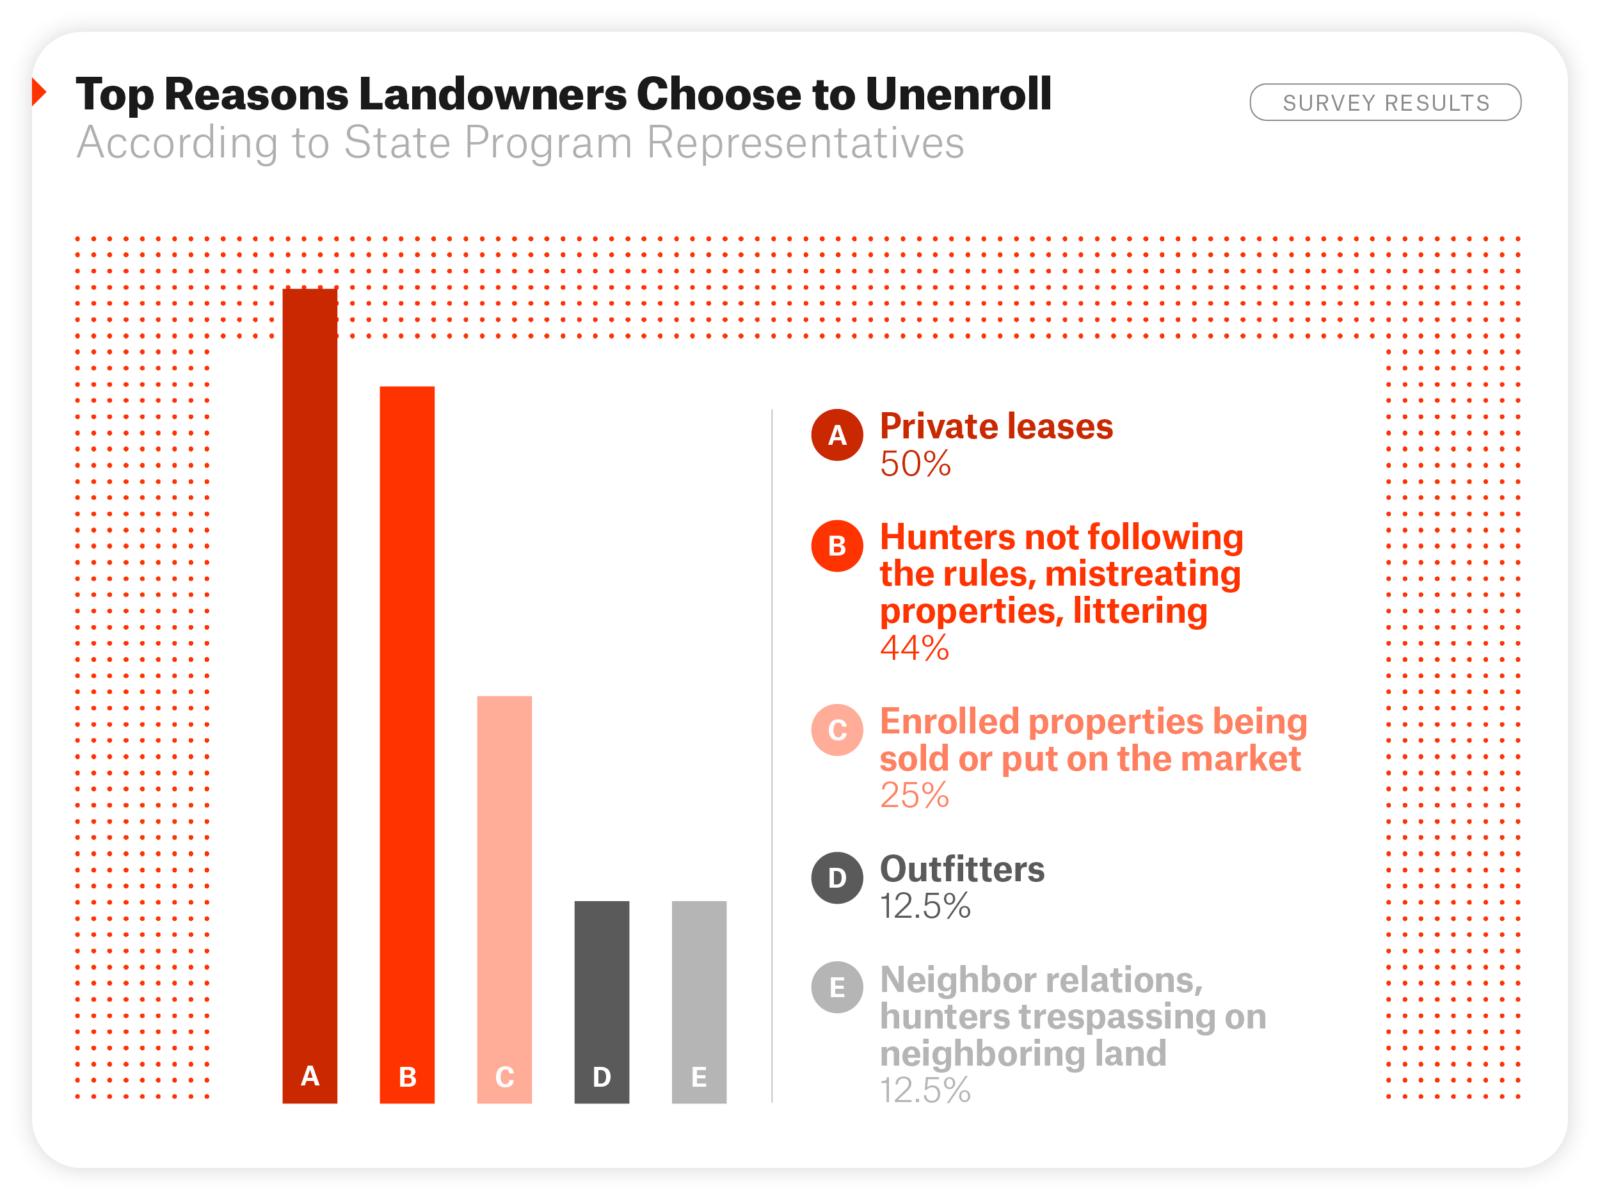 A line graph with survey results showing top reasons landowners choose to unenroll in private land access programs